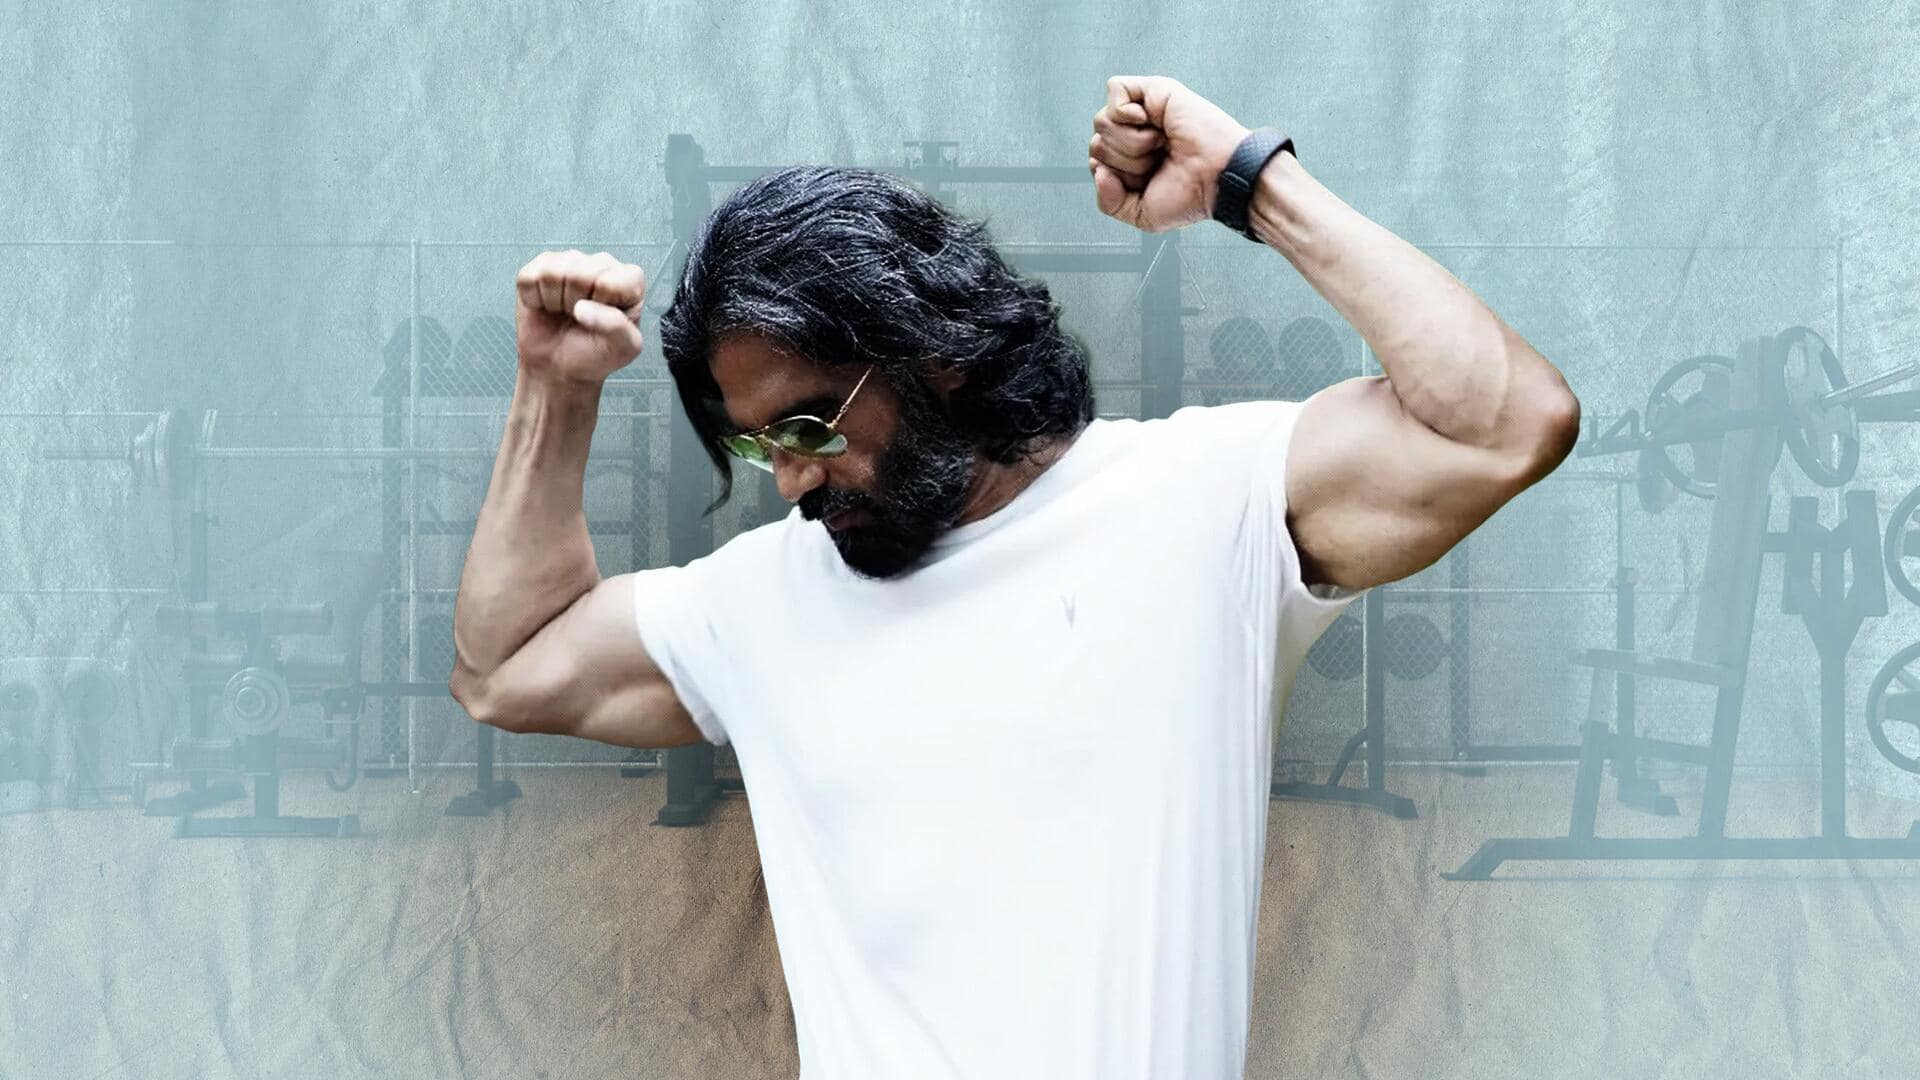 Happy Birthday, Suniel Shetty! Here's how the actor stays fit